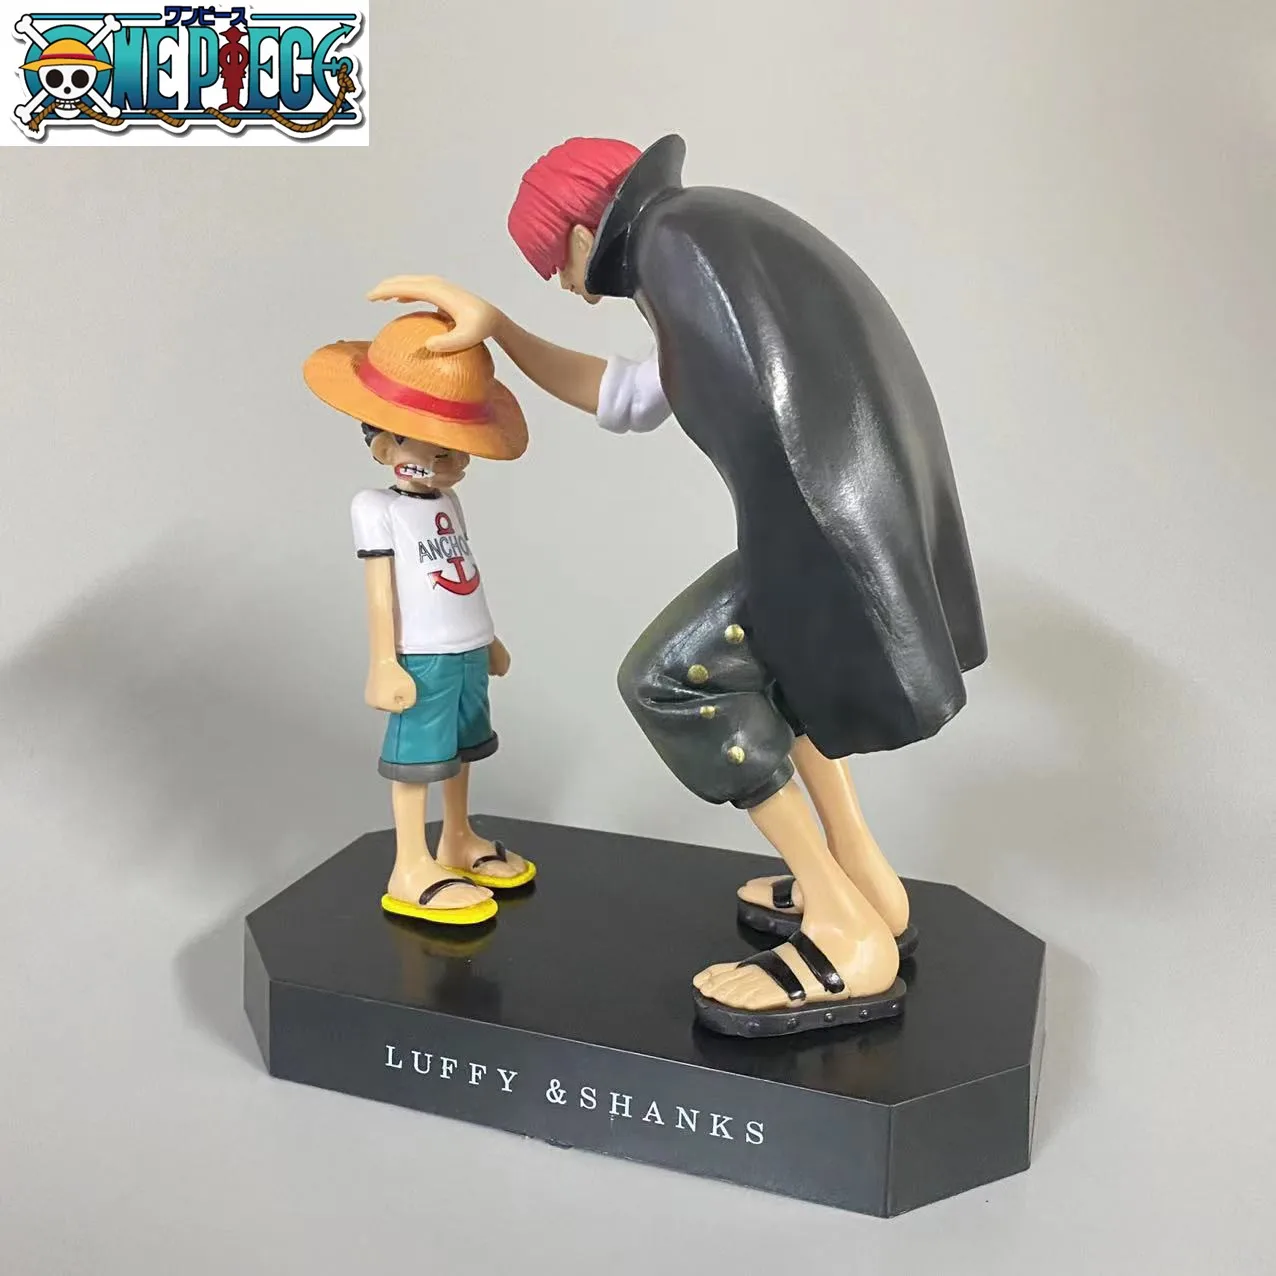 

One Piece Luffy Shunks PVC Action Figures Toy 18cm One Piece Anime Monkey D Luffy Figurine Toys Doll